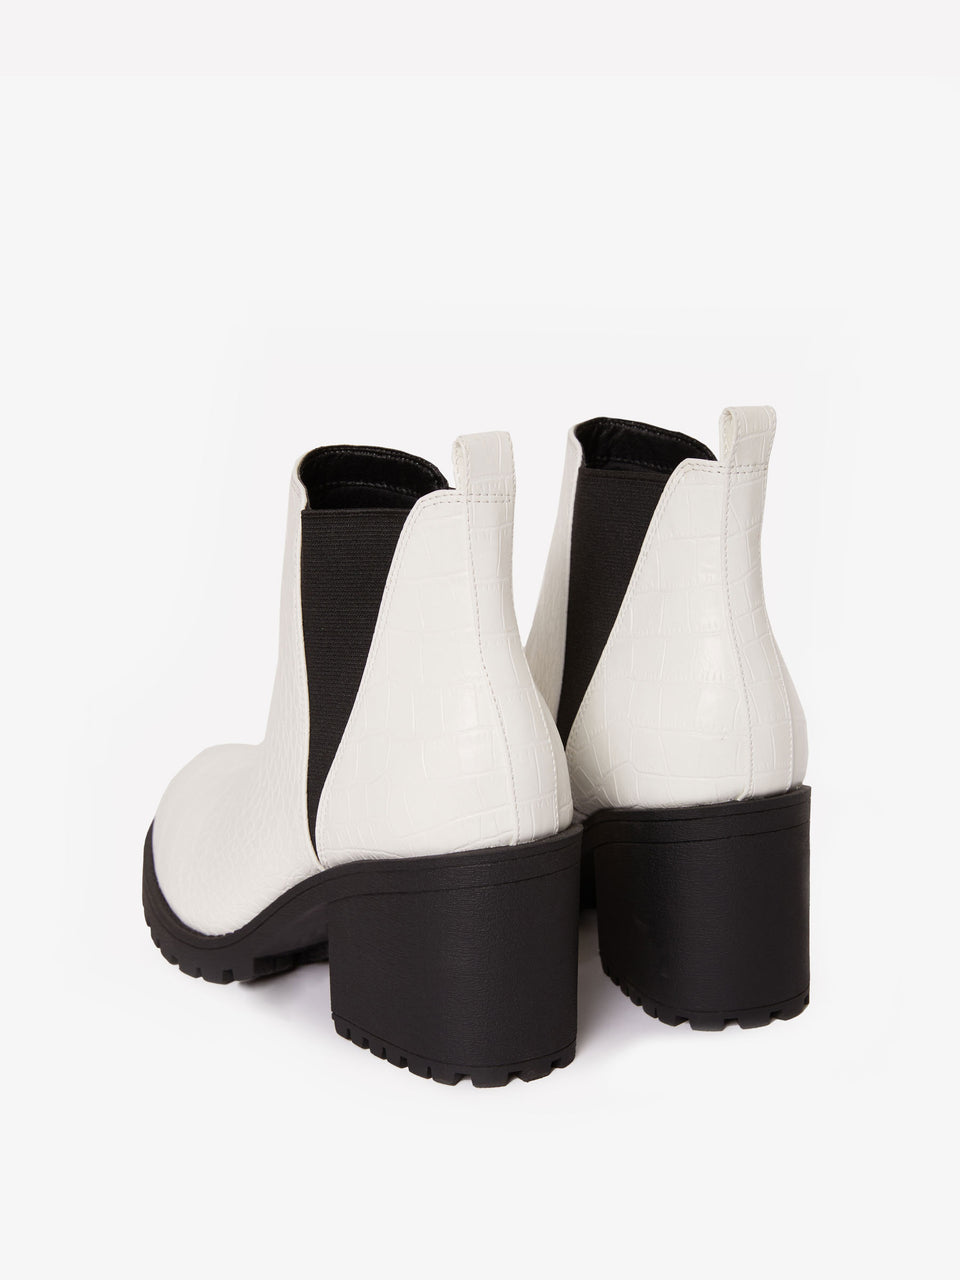 Chinese_Laundry_Lisbon_Croc_Bootie_White